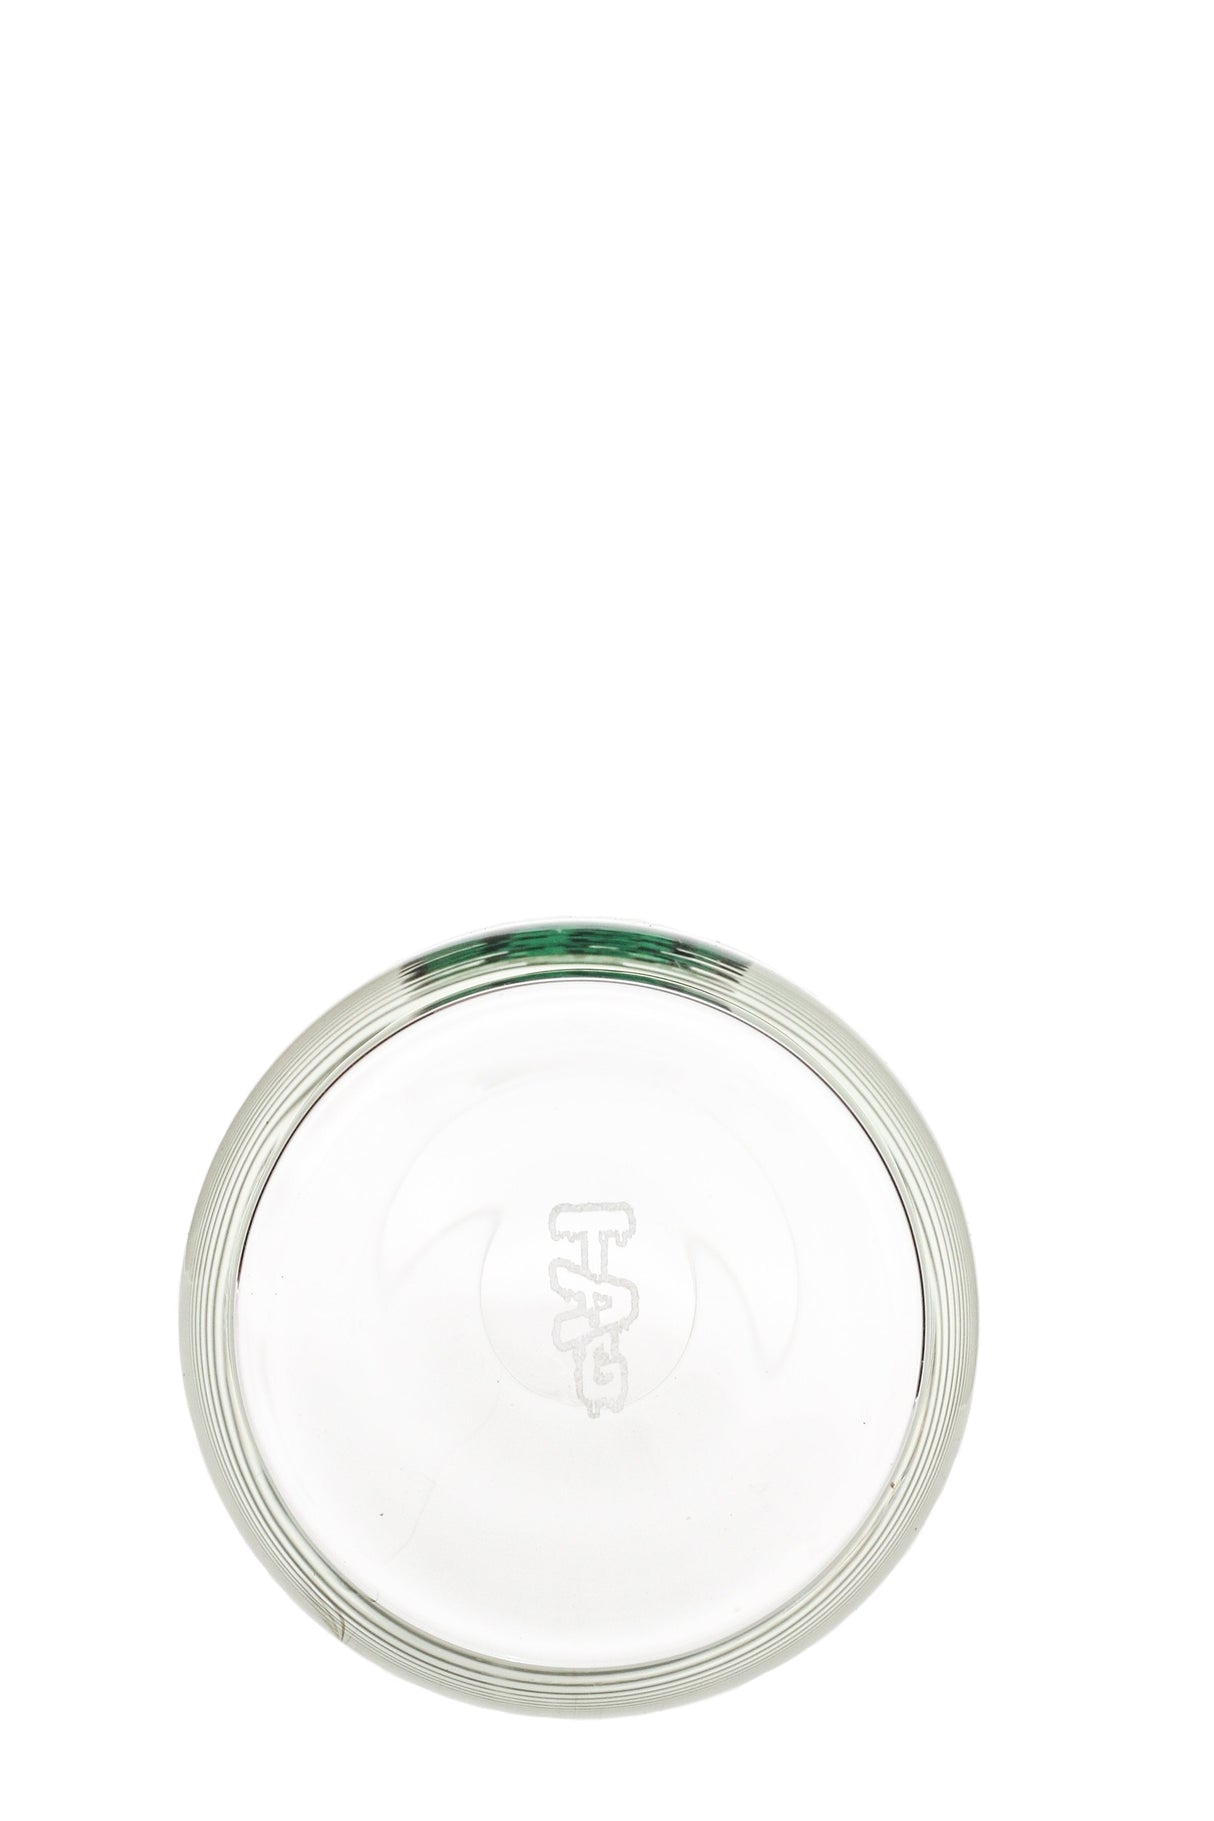 TAG 8" Clear Glass Jar with Cork Top, 75x5MM, Top View on White Background